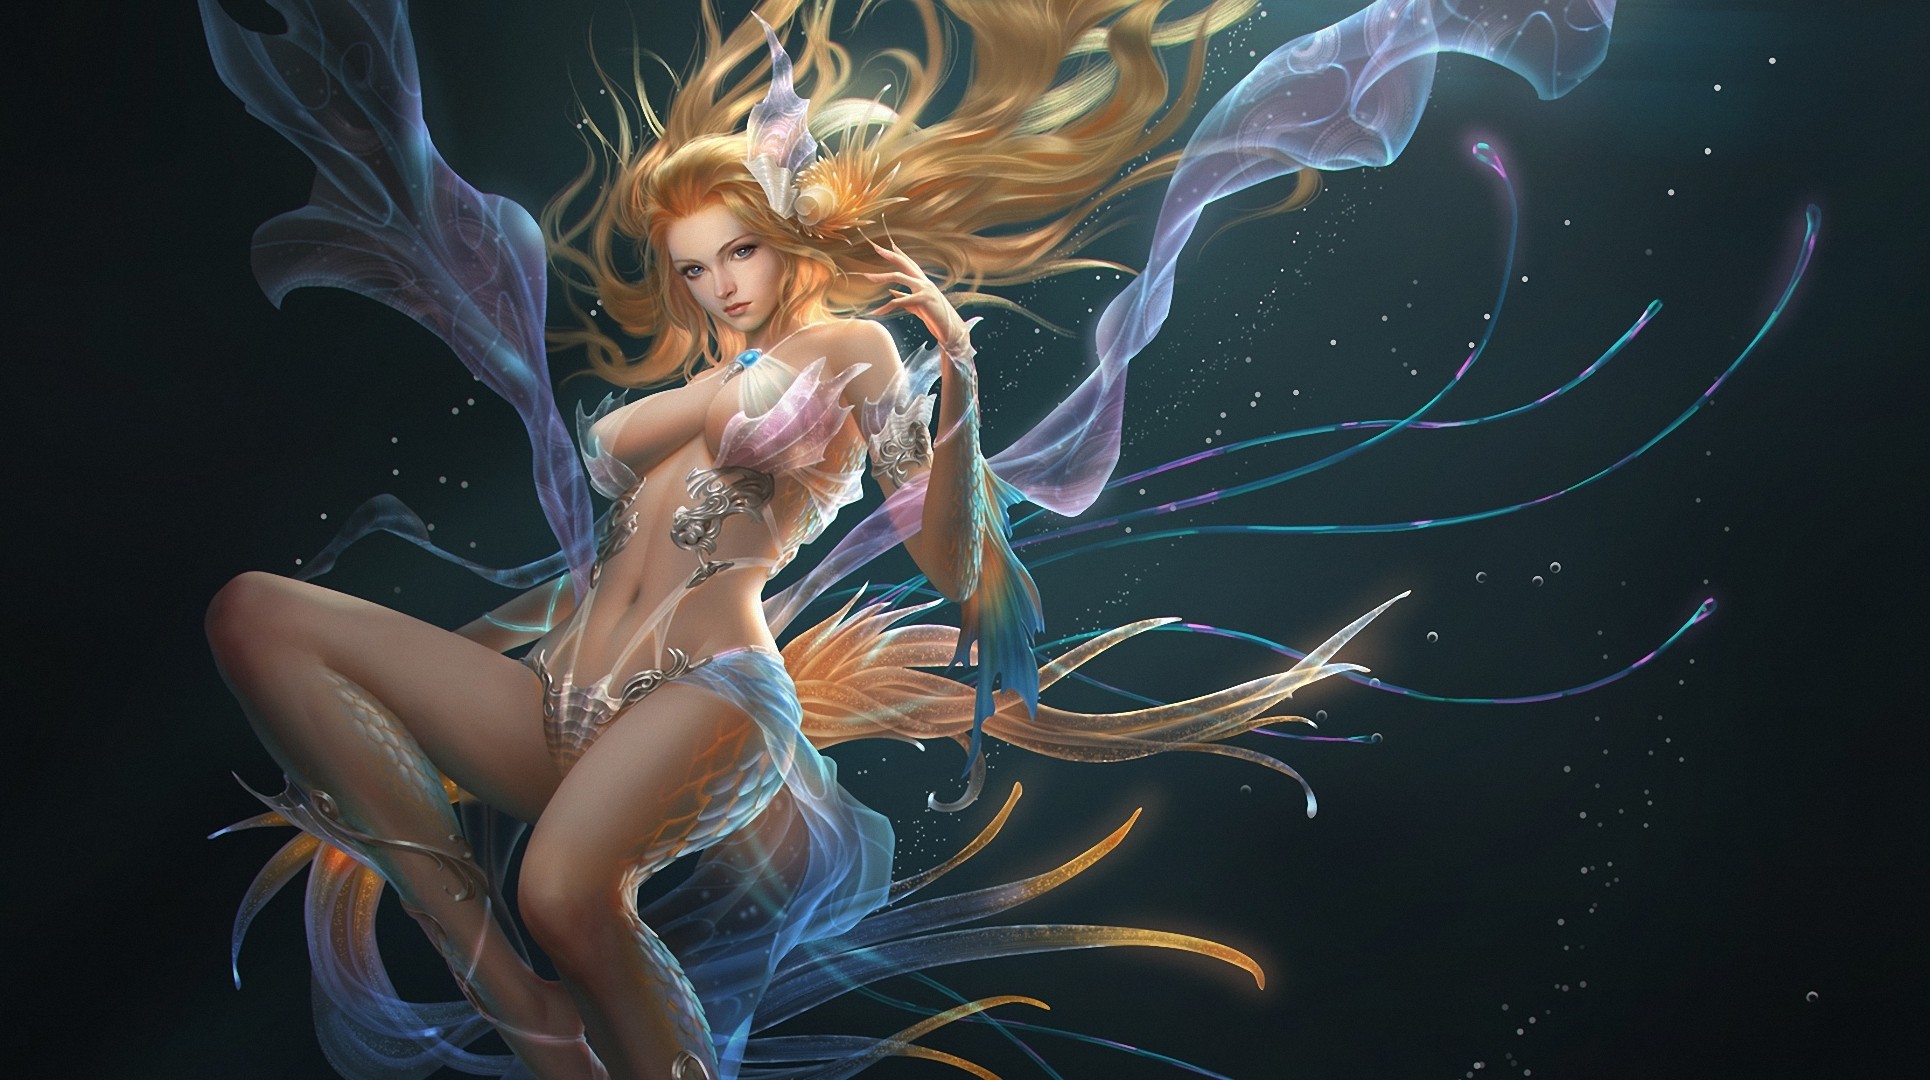 General 1930x1080 fantasy art League of Angels boobs blonde long hair fantasy girl legs belly big boobs looking at viewer women PC gaming video game girls video game art